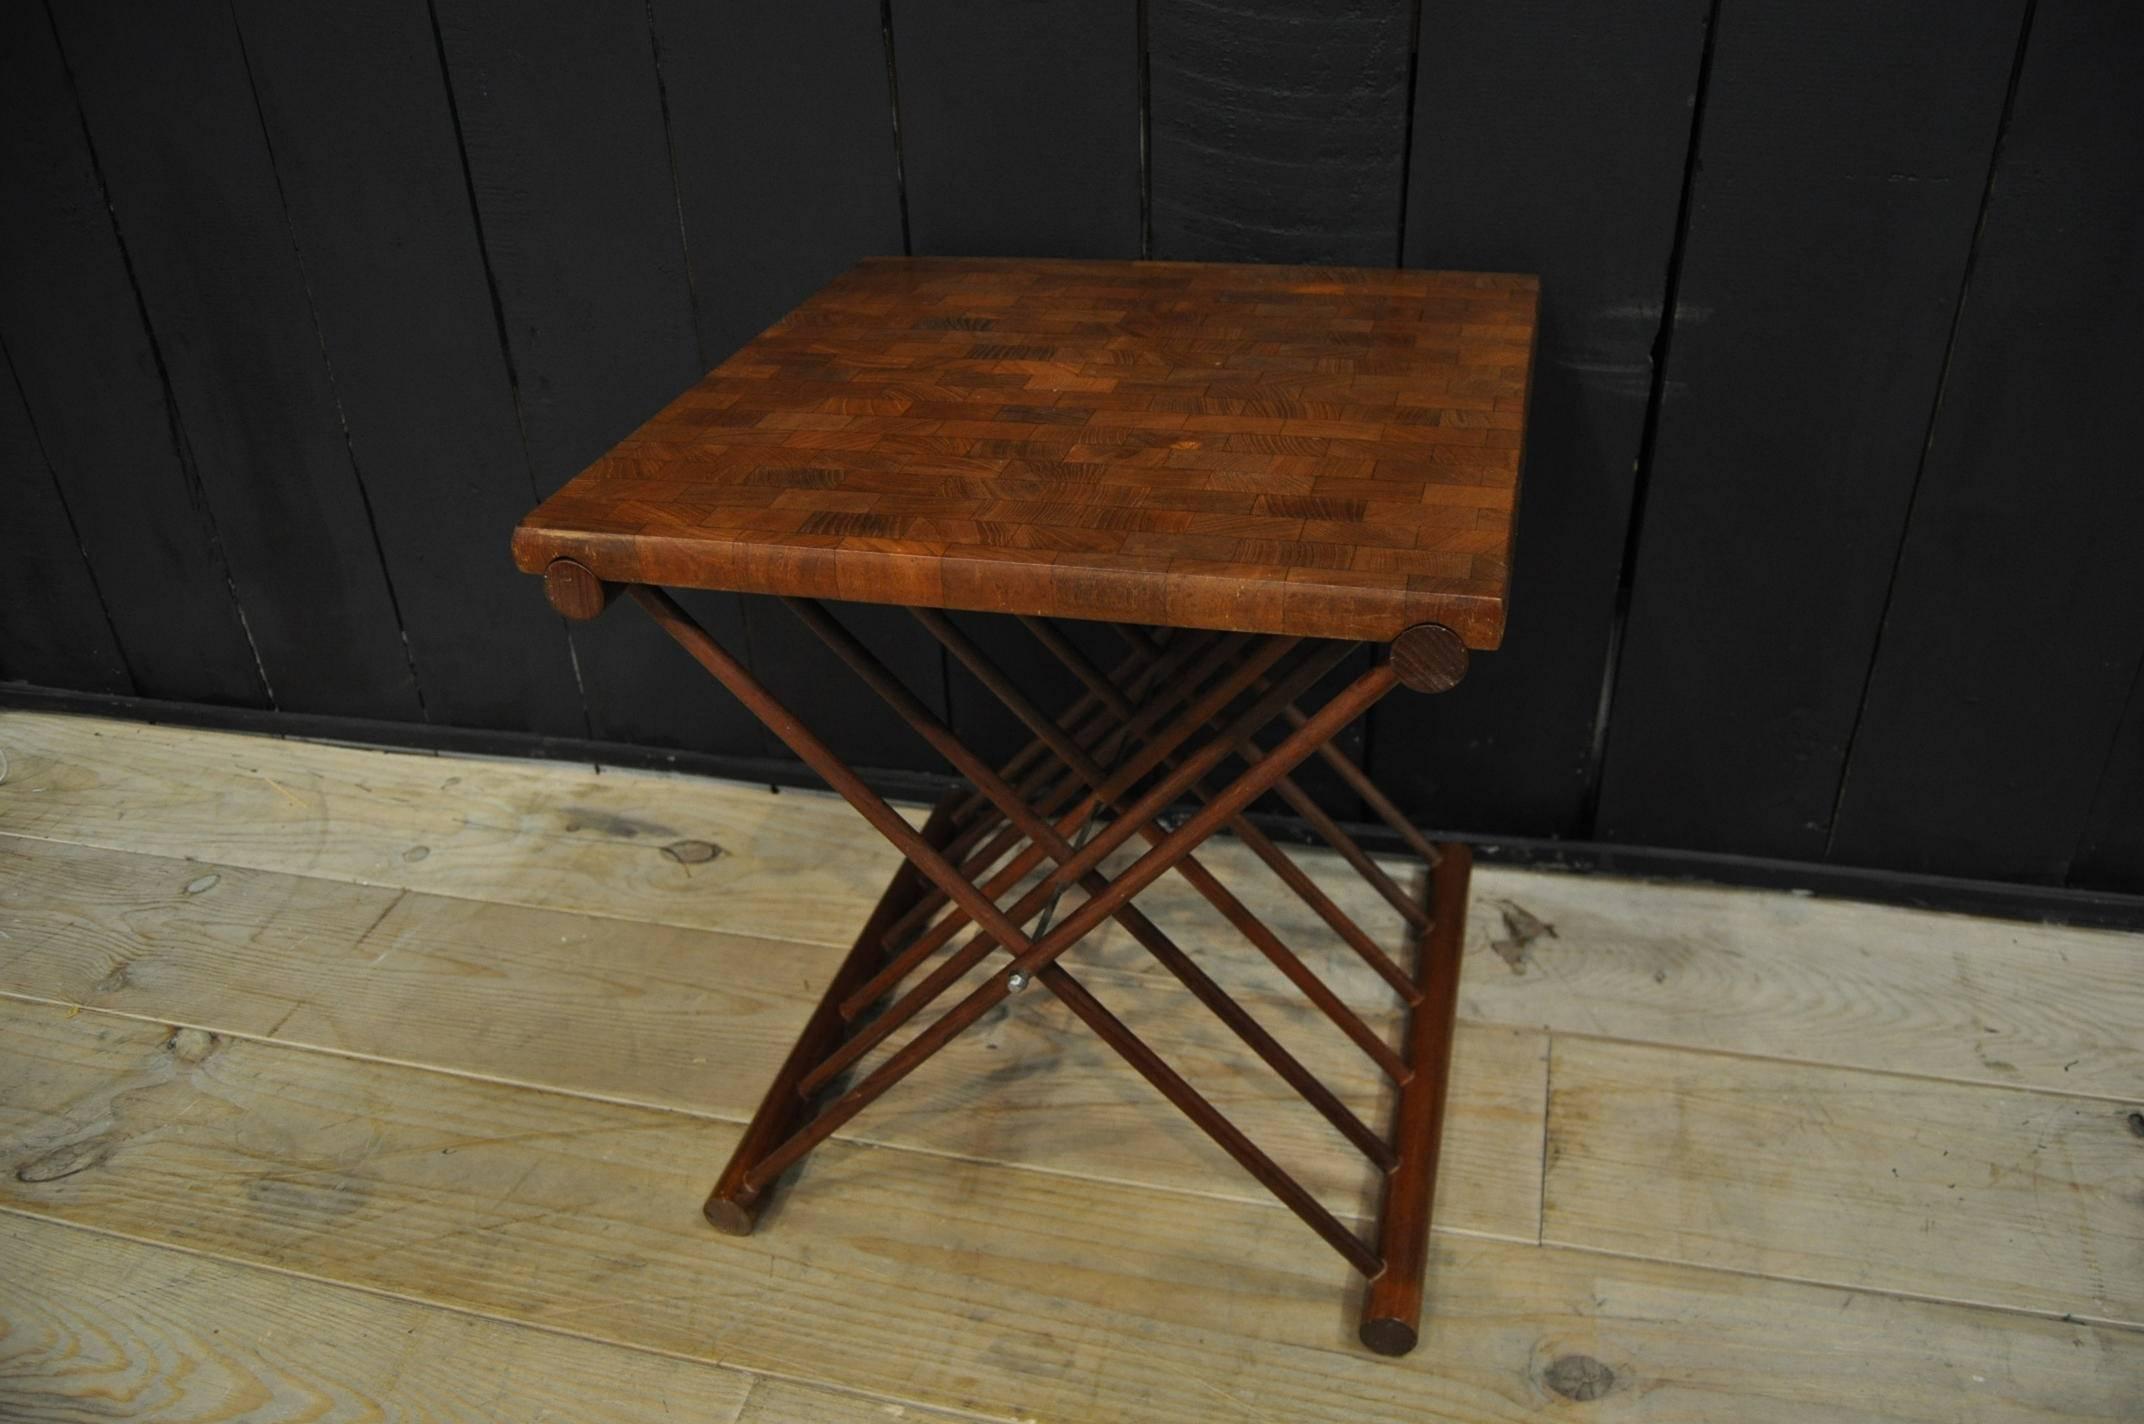 A cute folding table by Jens Quistgaard Bois de bout marquetry (teak) in good condition, circa 1960.